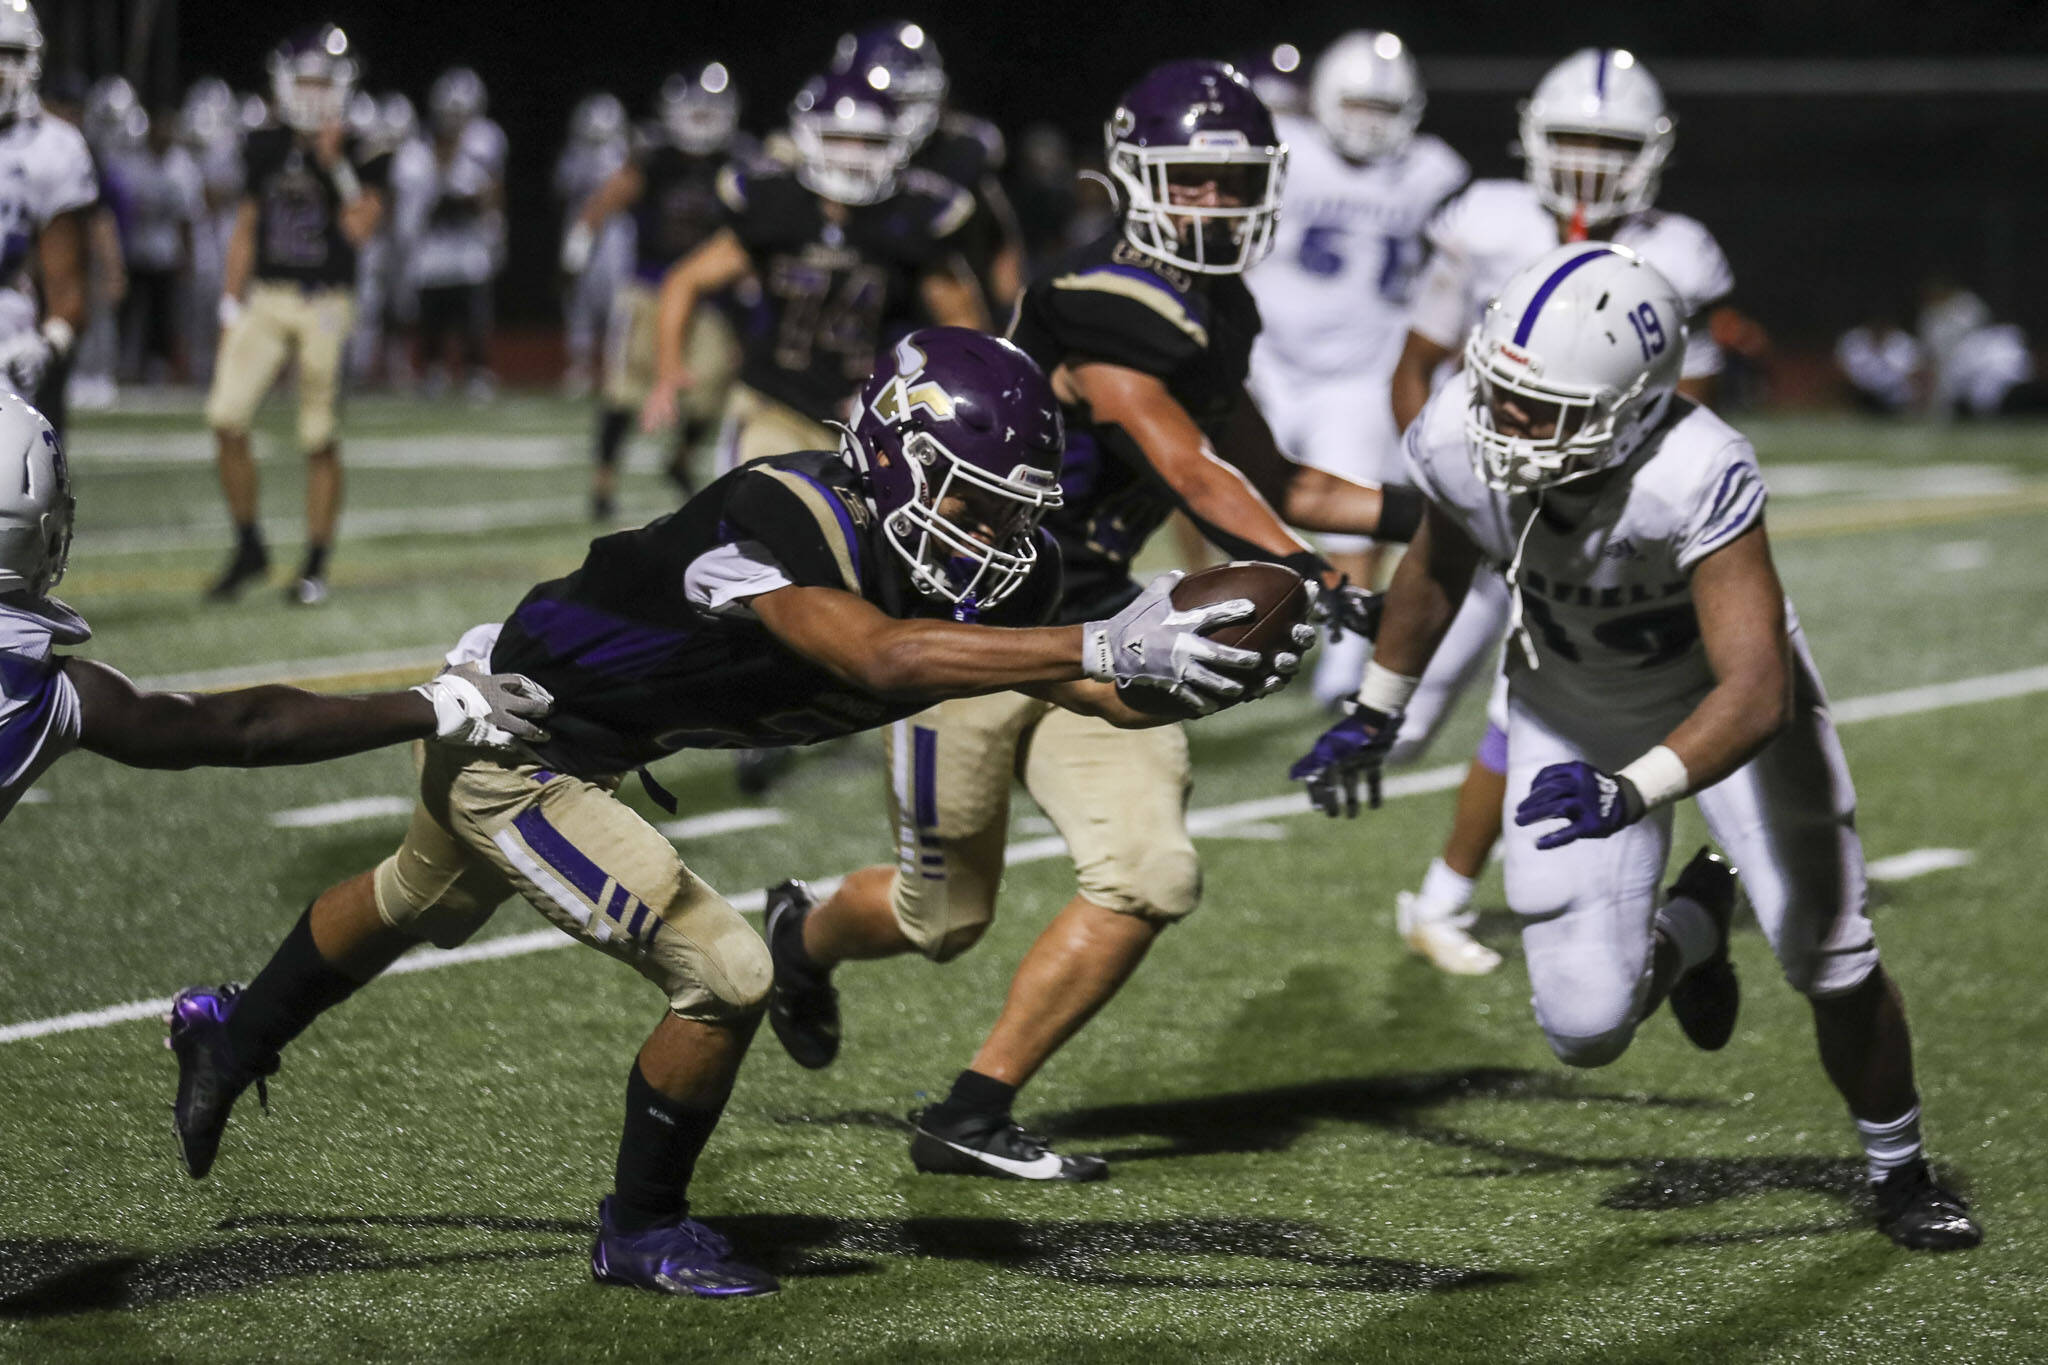 Lake Stevens’ Steven Lee (2) scores during a football game between Lake Stevens and Garfield at Lake Stevens High School in Lake Stevens, Washington on Friday, Sept. 1, 2023. The Vikings won 48-21. (Annie Barker / The Herald)